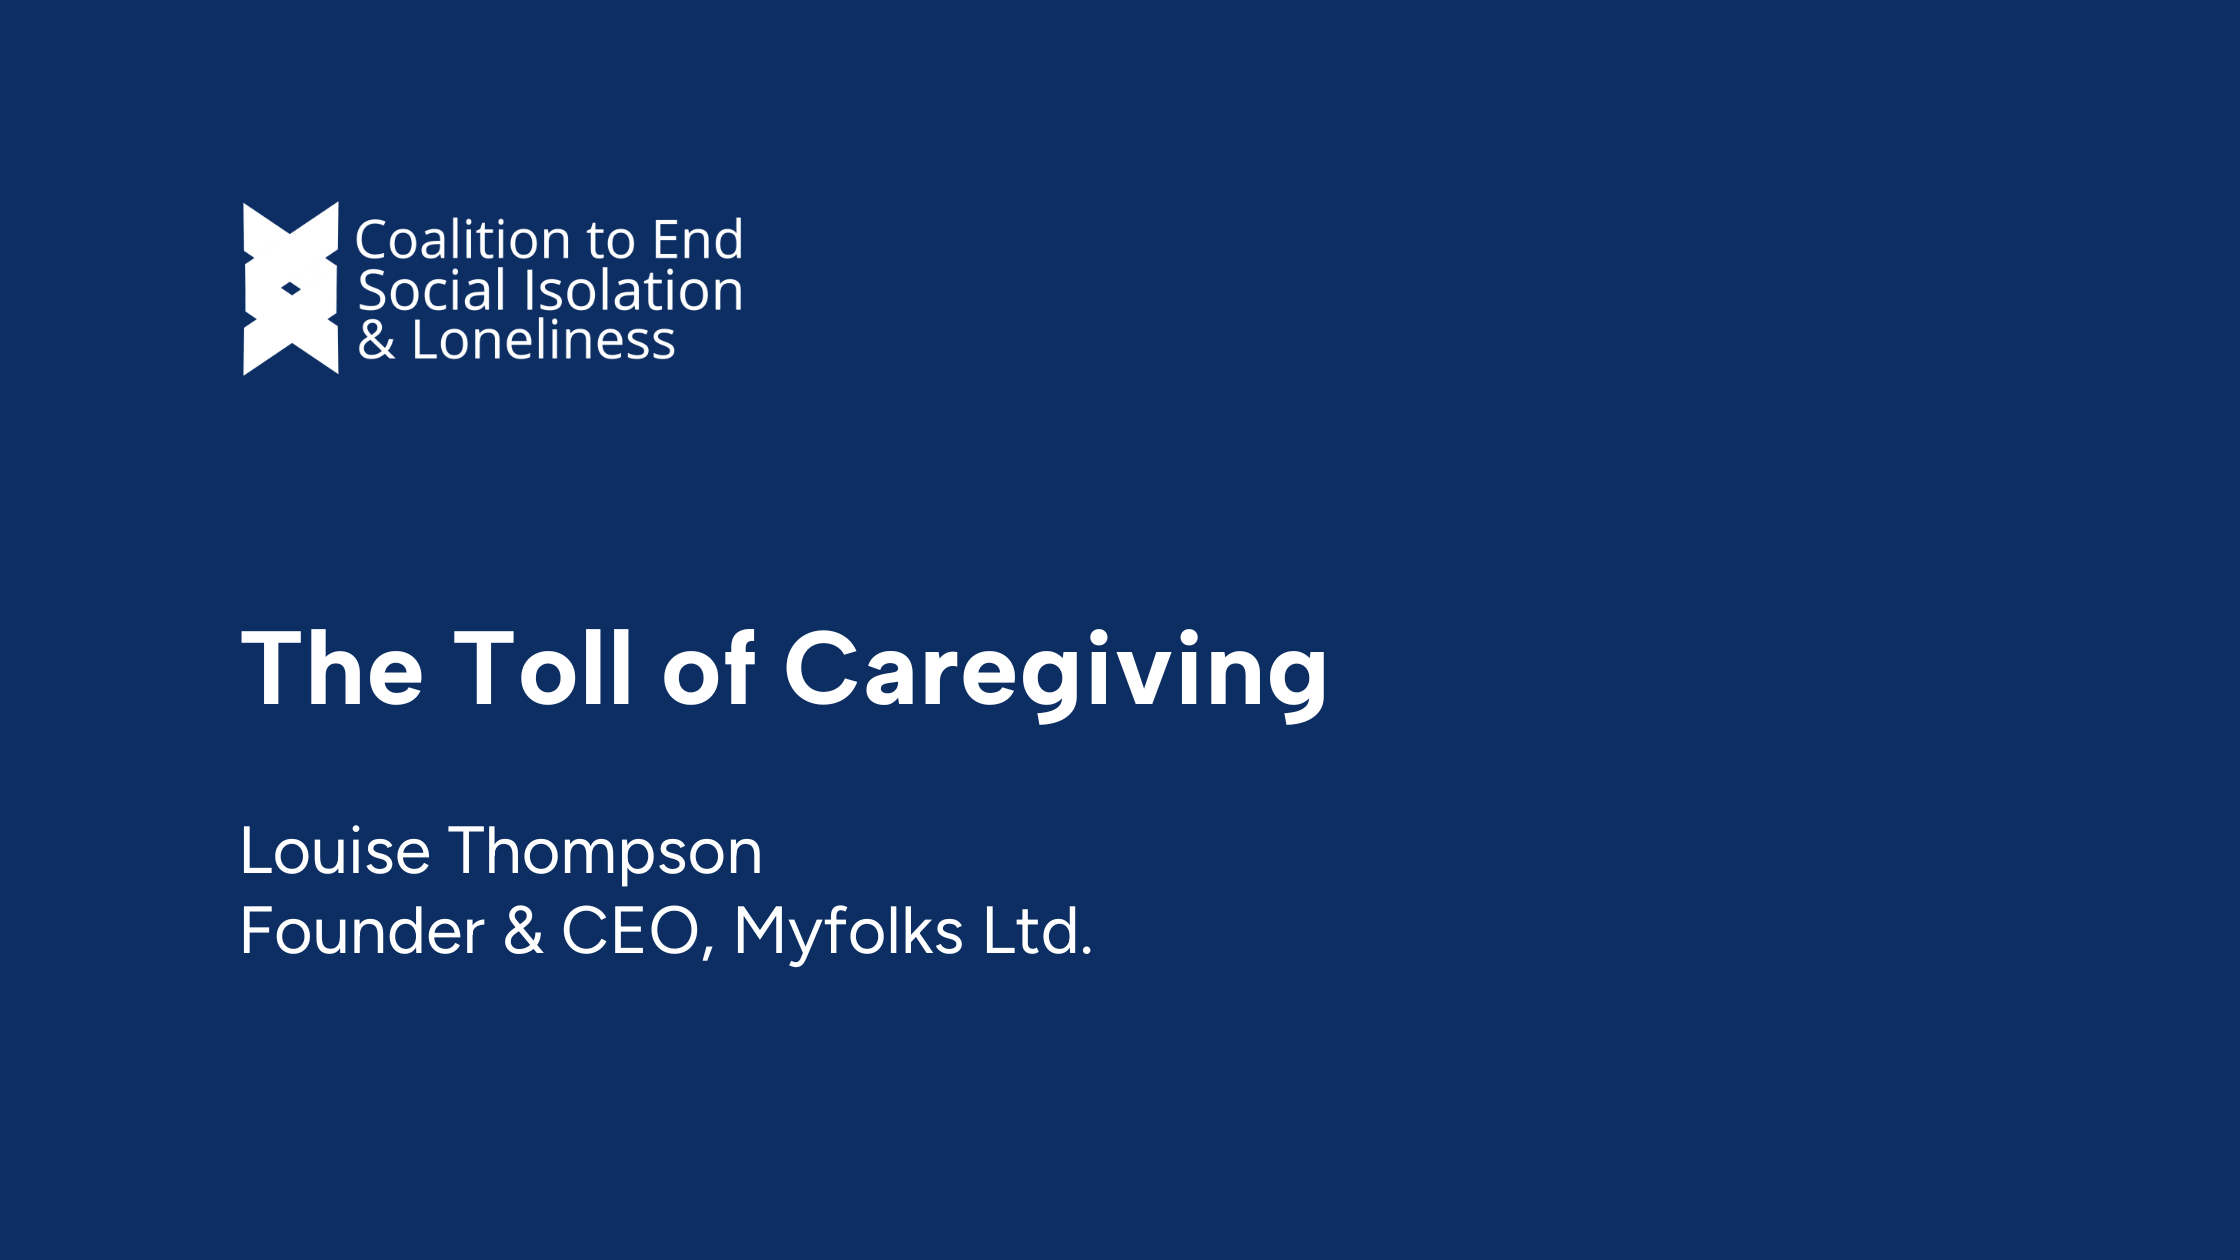 The Toll of Caregiving